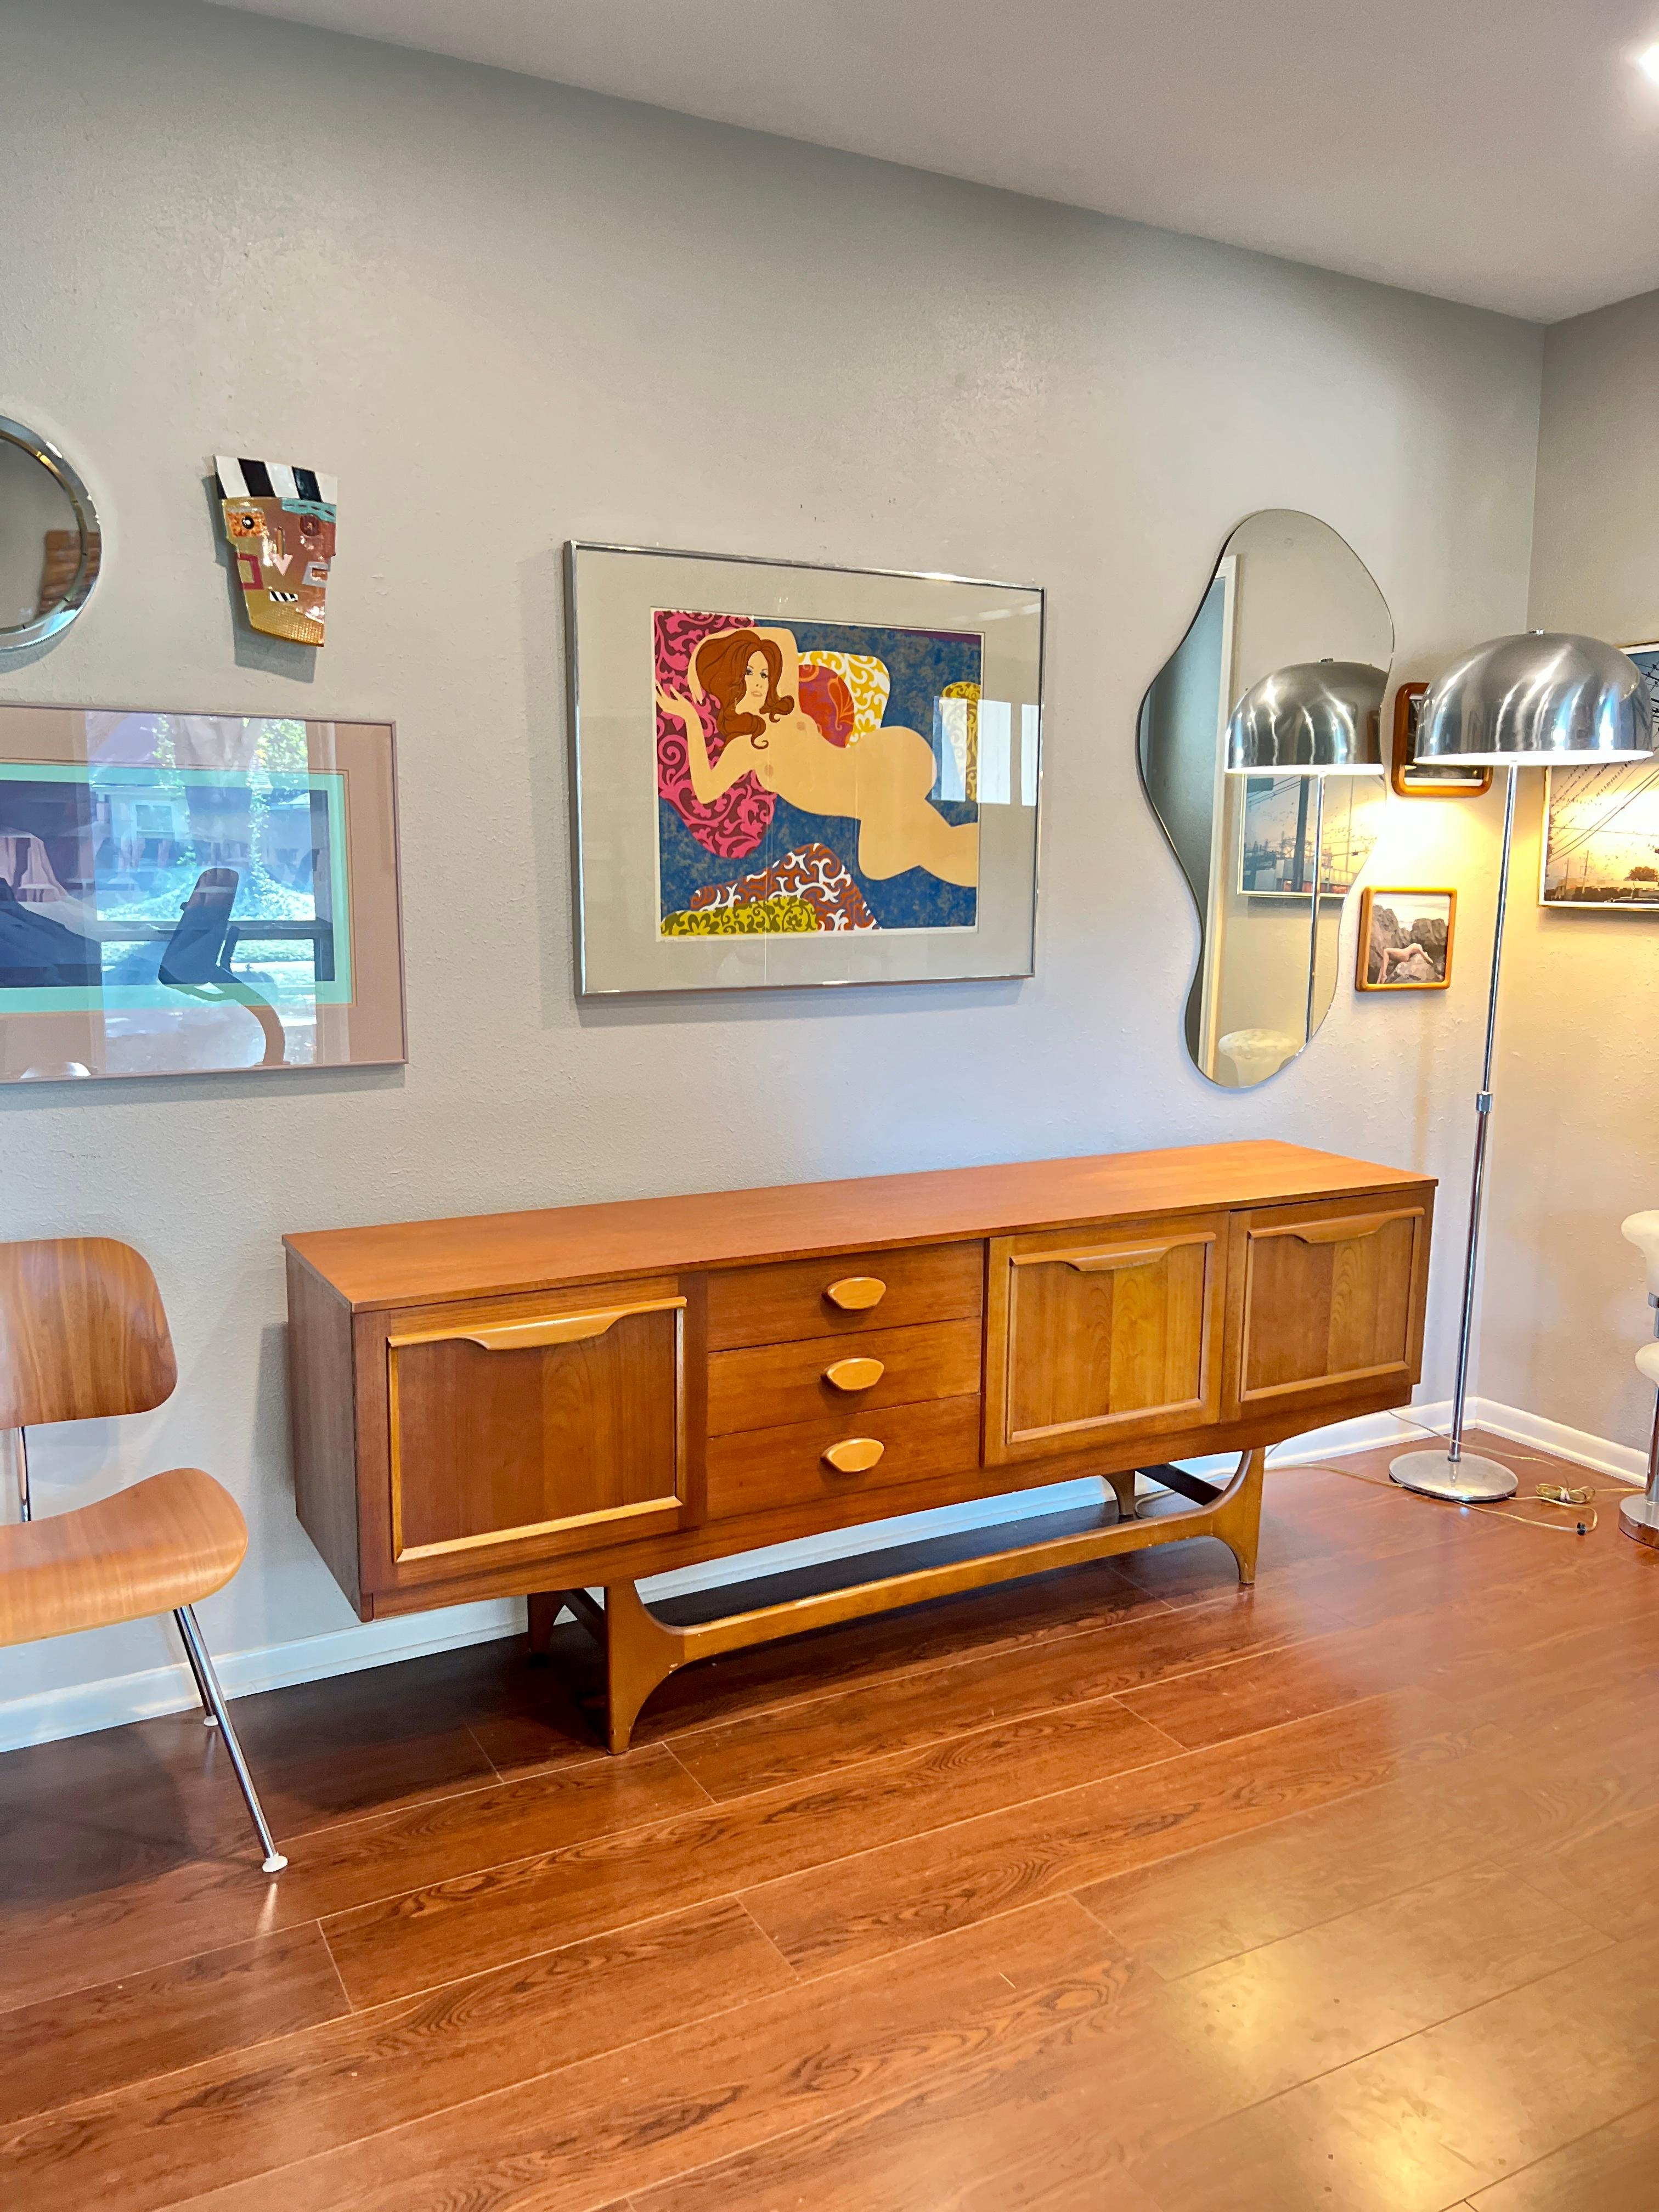 Mid century modern teak sideboard by Stonehill's Stateroom range, circa 1960s. Includes 2 end cupboards with a bank of 3 drawers and a pull down drinks cabinet. All drawers open and close smoothly and the sideboard is structurally sound. Some